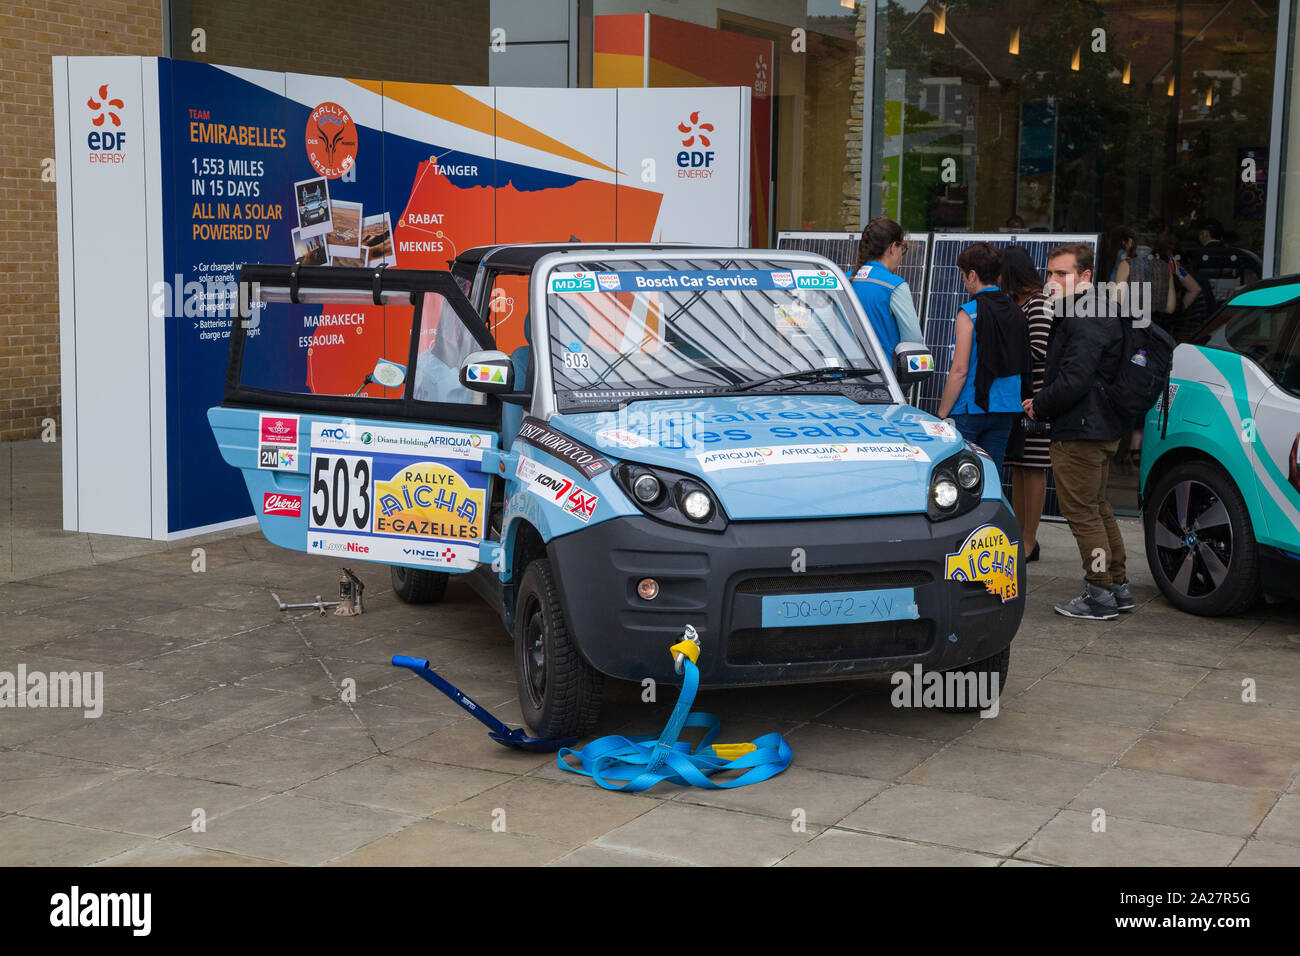 The EDF Emirabelles solar-powered electric car on display at the Oxford EV Summit 2019 for electric vehicles. Stock Photo